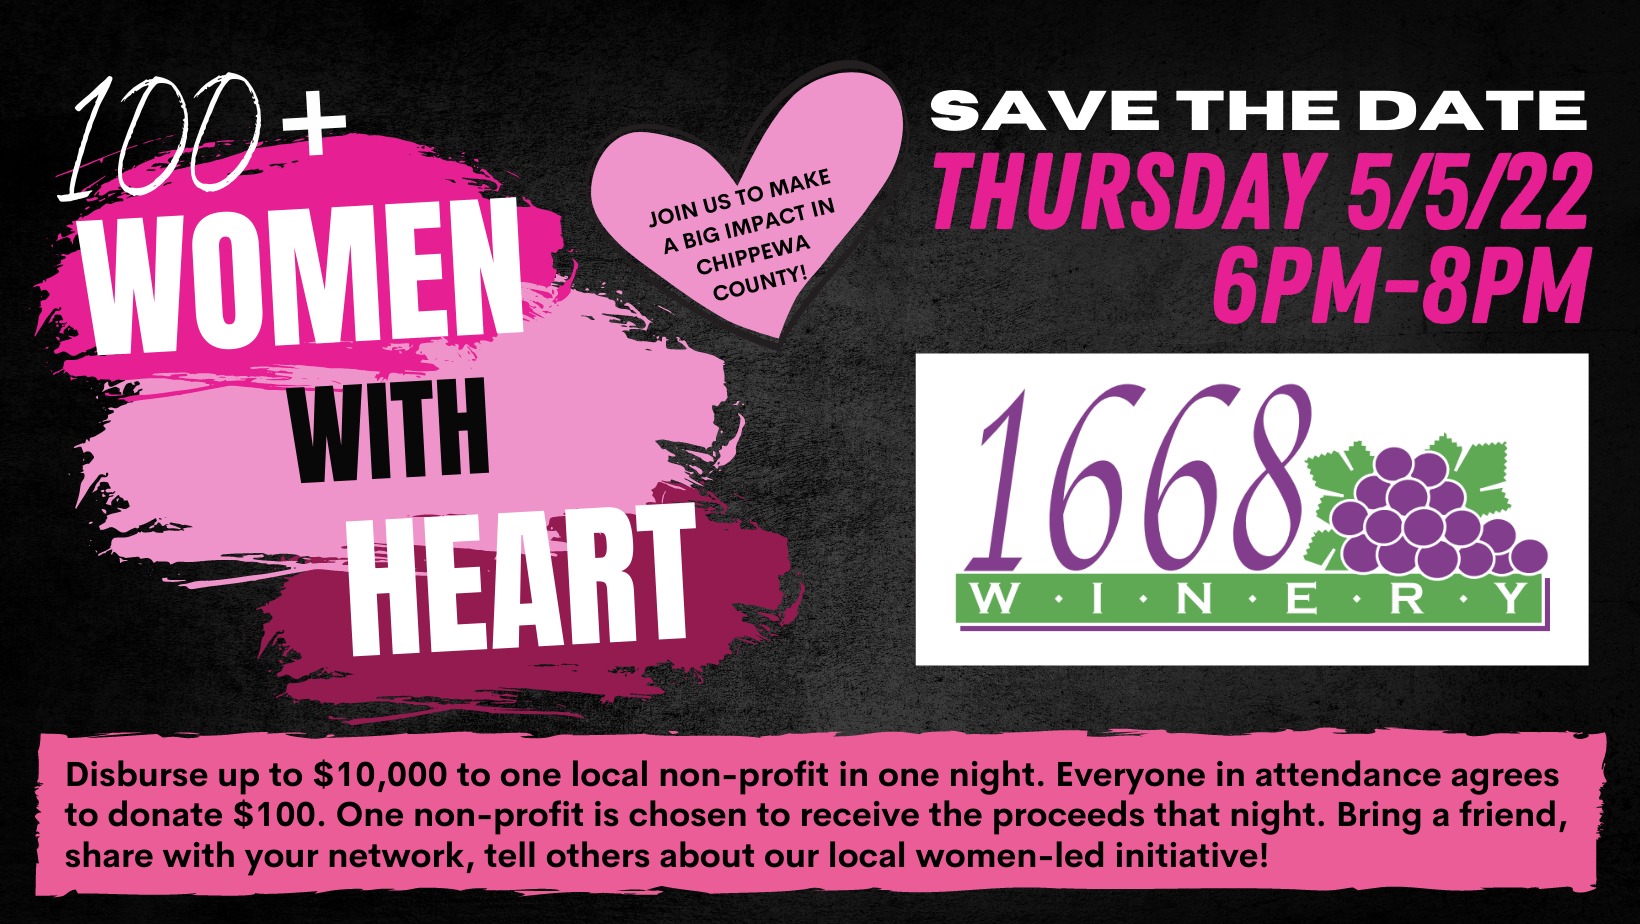 100+ women with heart event by 1668 winery